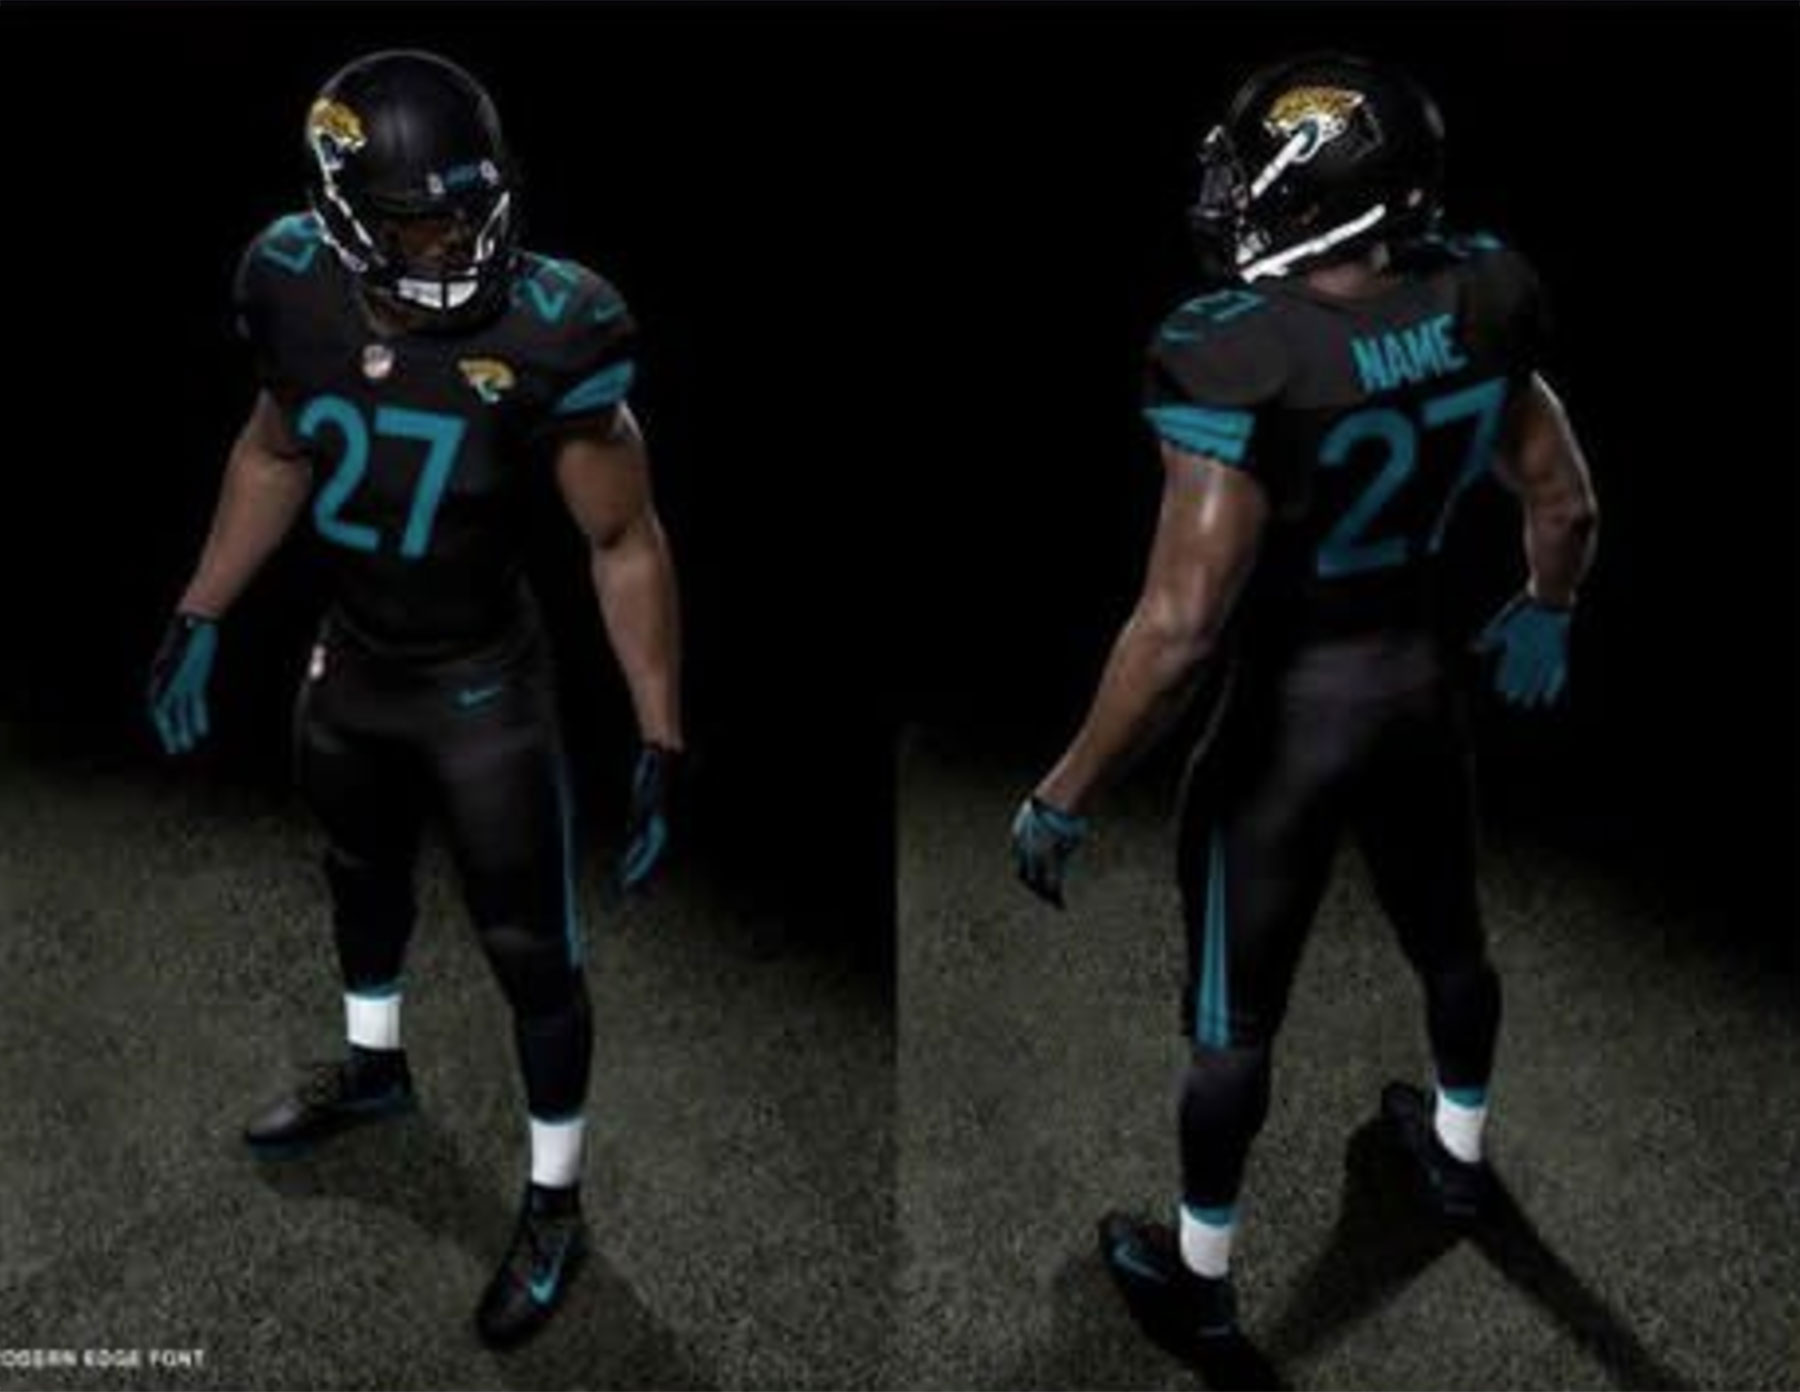 LEAKED: Images Of The New Jacksonville Jaguars Uniforms Surface (PICS)